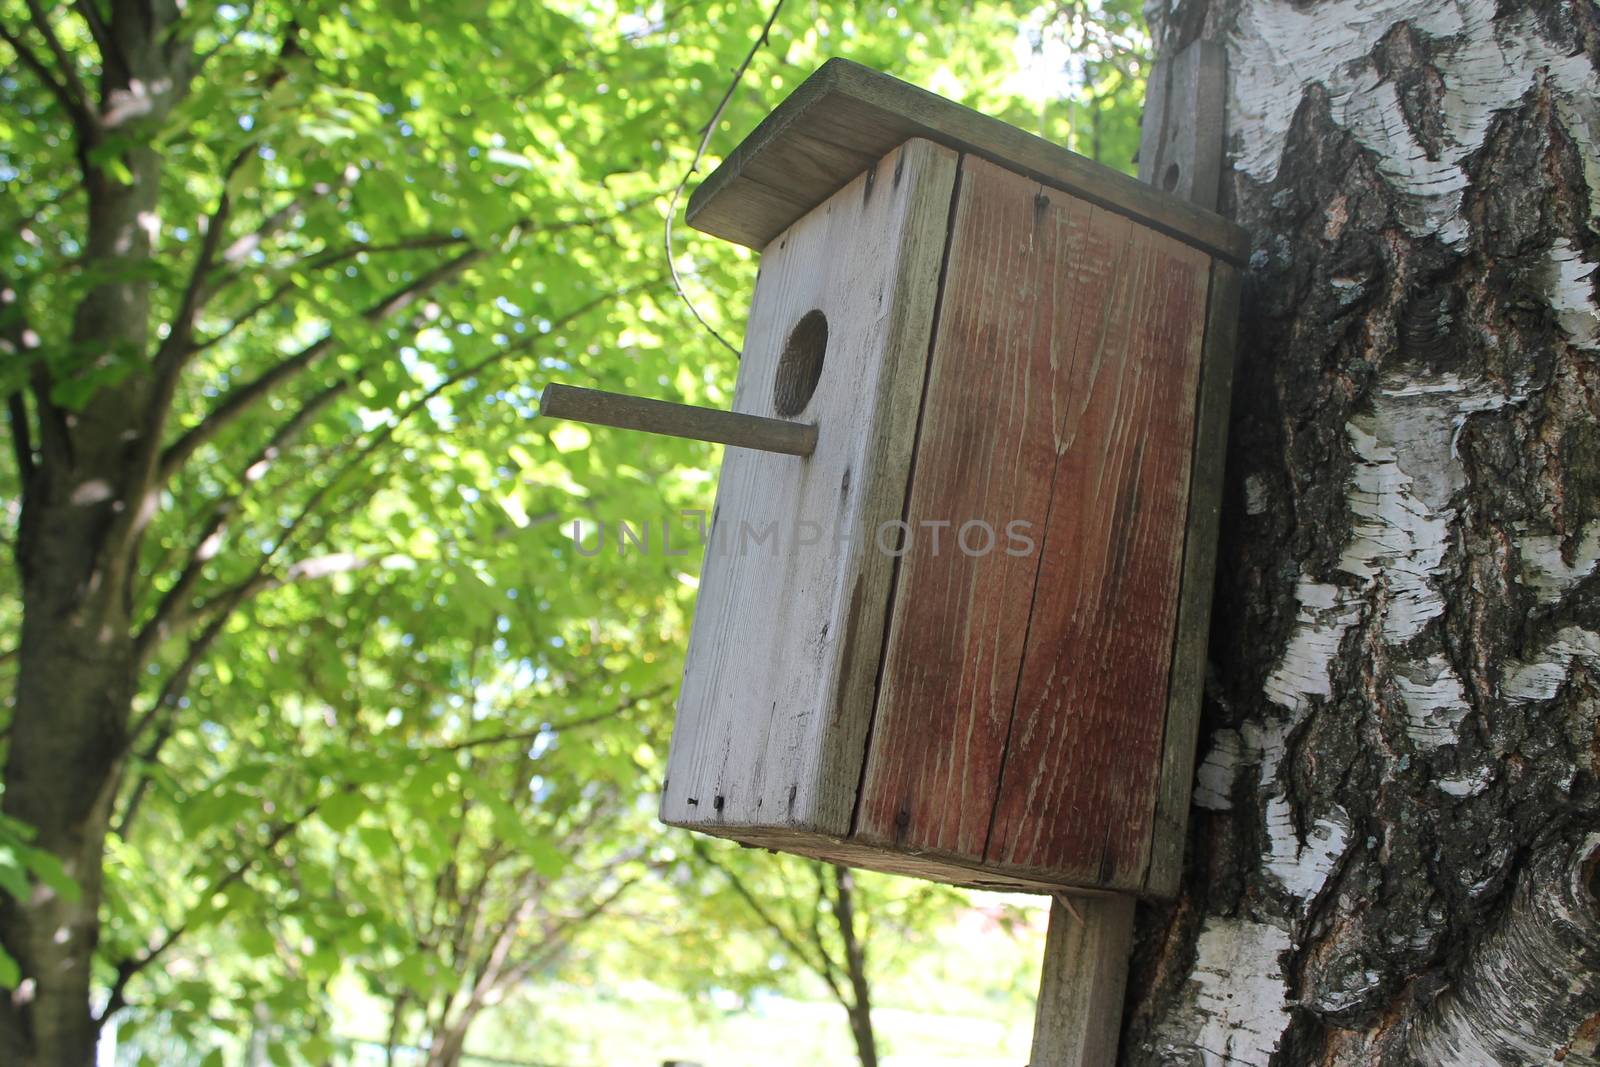 A birdhouse on a tree in a forest.